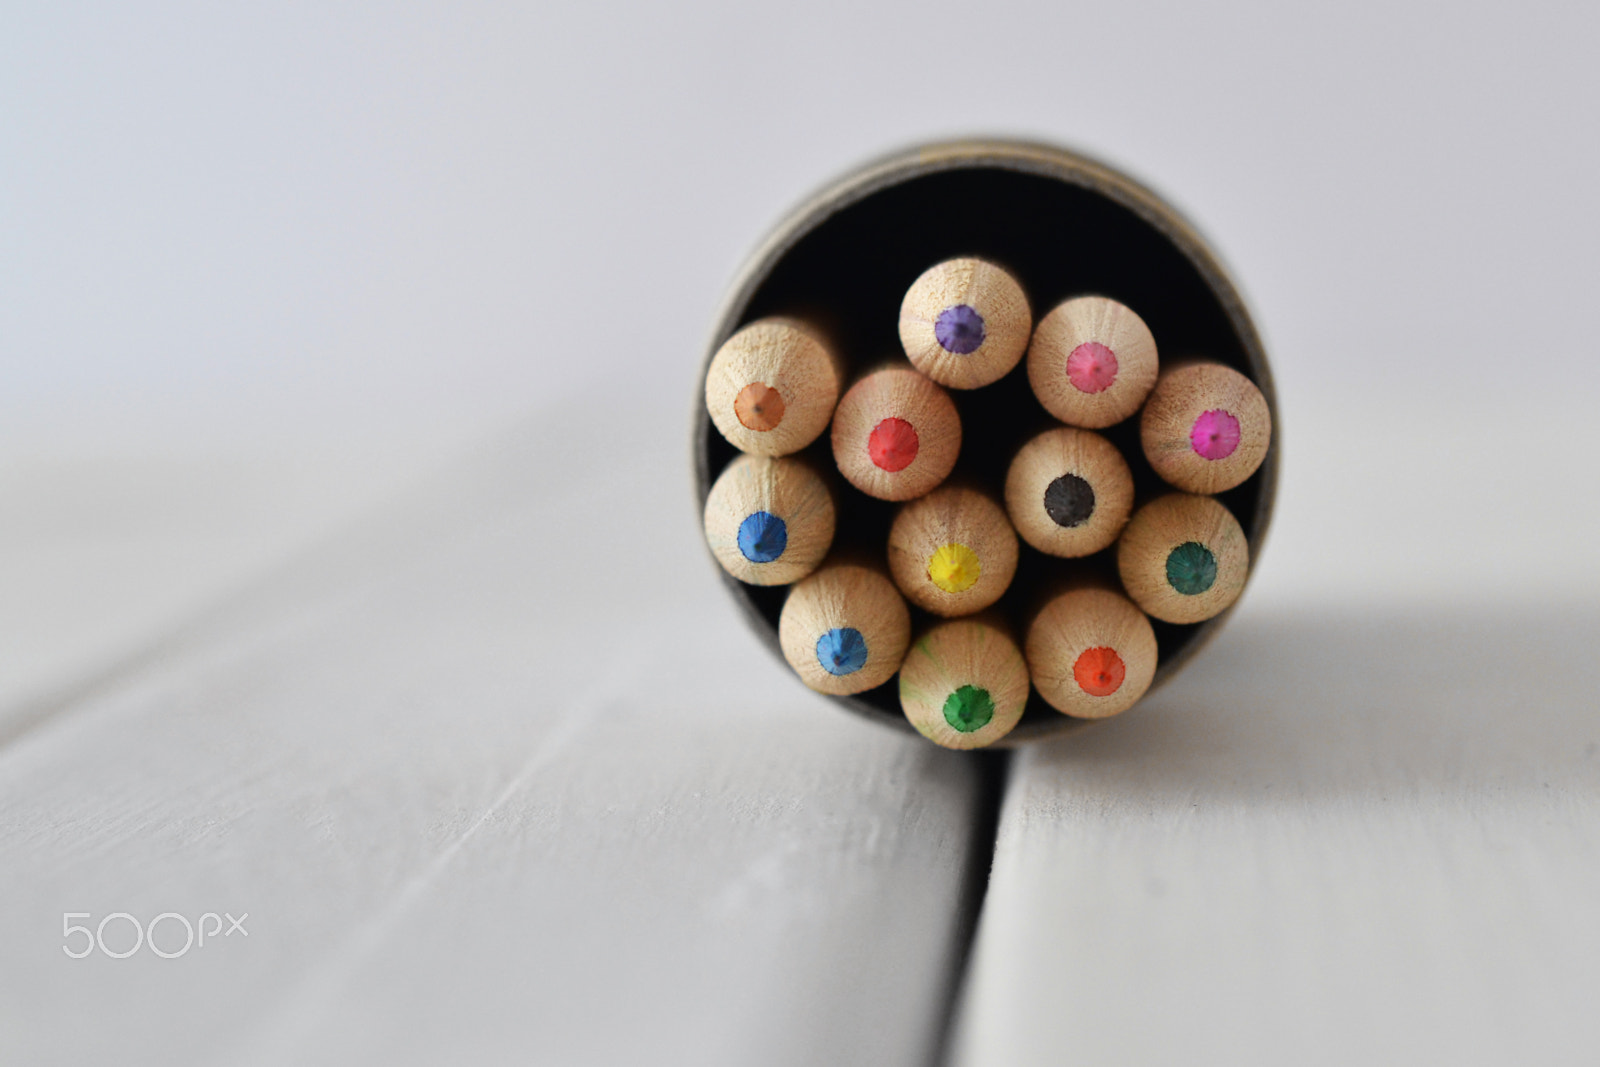 Nikon D3100 sample photo. Colored pencils in cylinder on white wood table photography